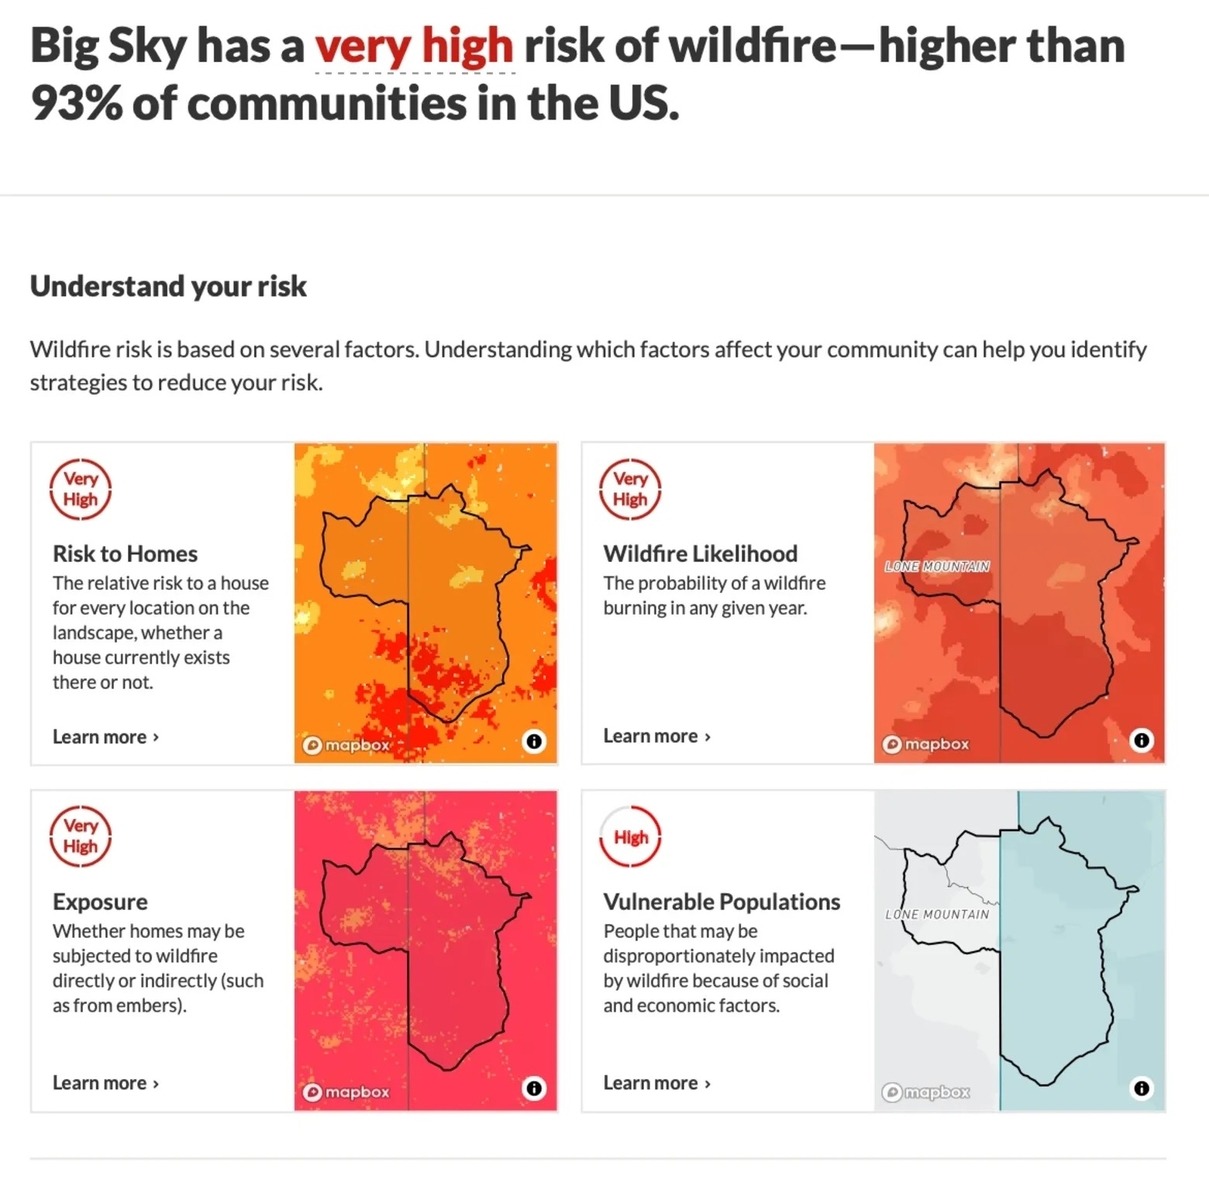 A graphic prepared by the US Department of Agriculture/US Forest Service that puts Big Sky at "very high" risk in three of four categories: probability of wildfire; risk to homes; and exposure.  